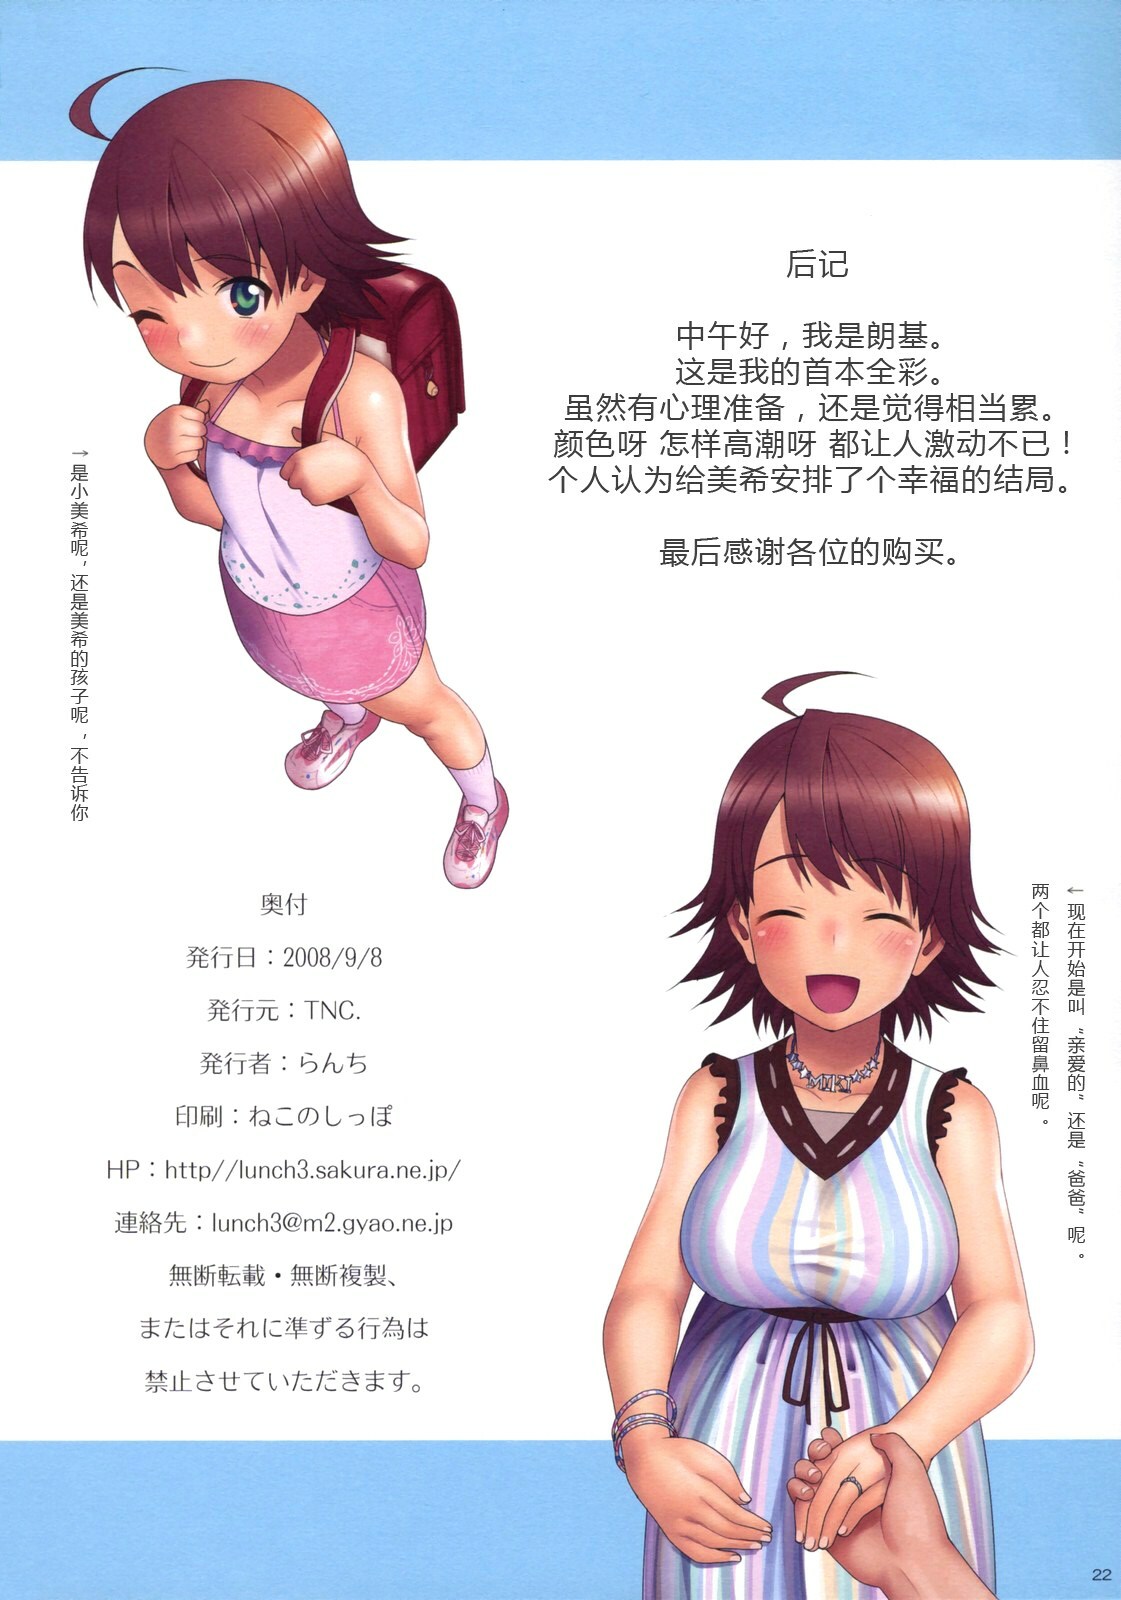 (CT12) [TNC. (Lunch)] Fourteen Plus (THE iDOLM@STER) [Chinese] [真实de汉化组] [Decensored] page 21 full